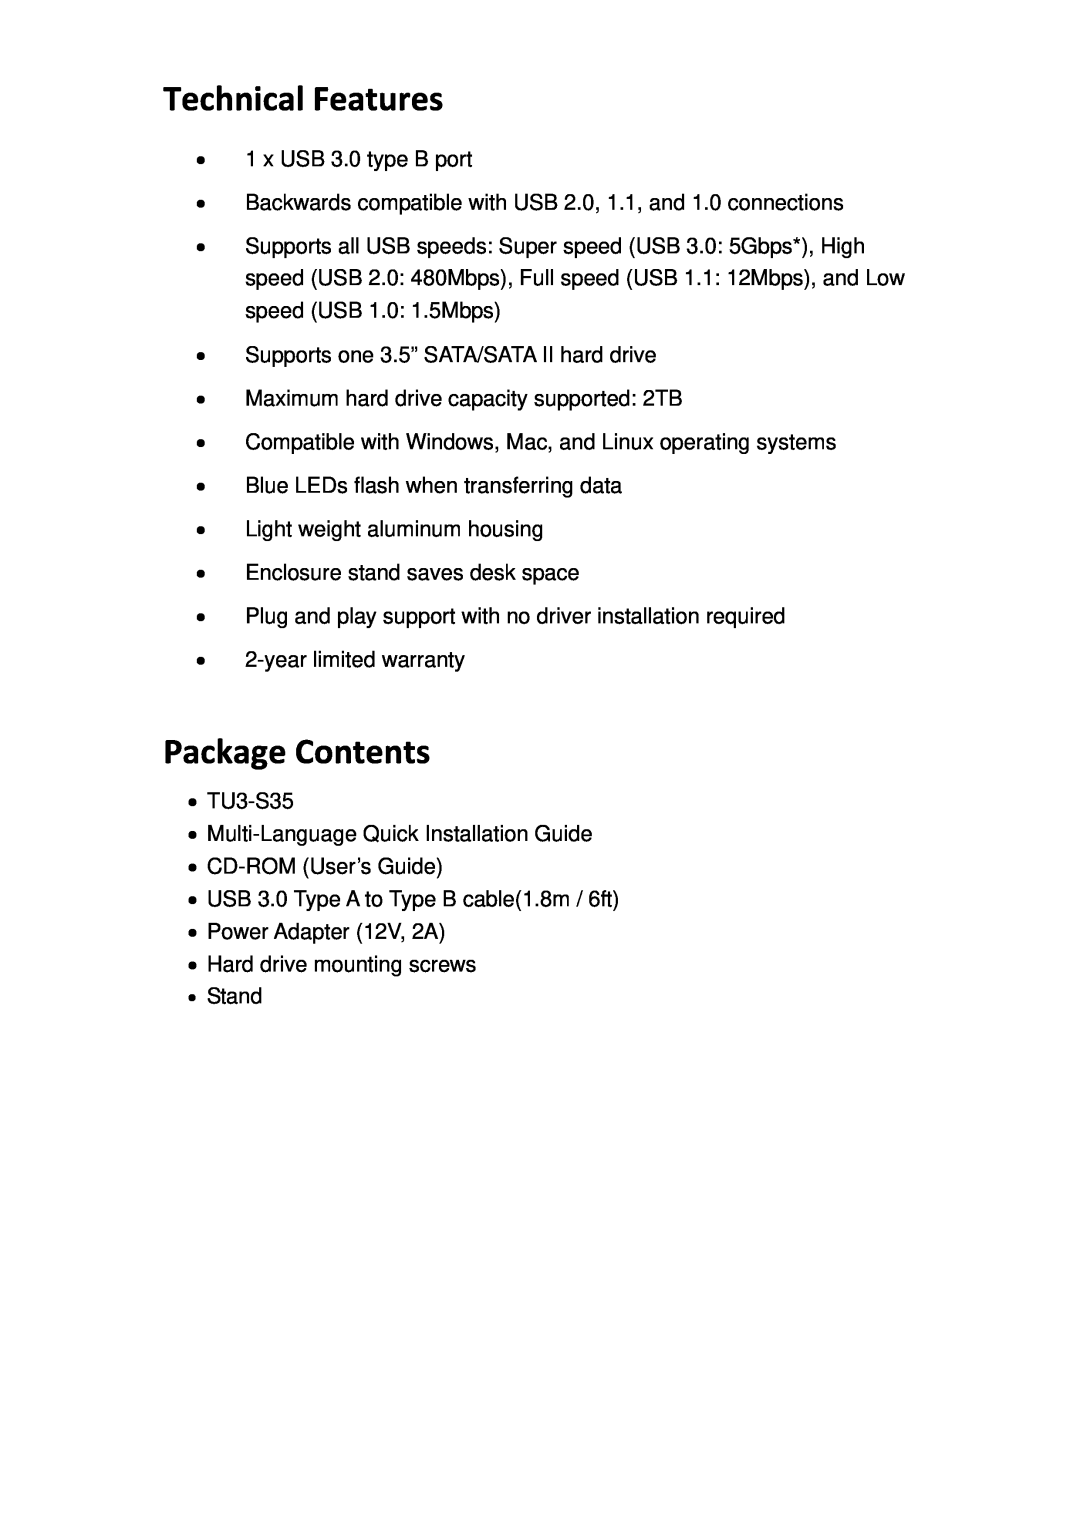 TRENDnet TU3S35 manual Technical Features, Package Contents 